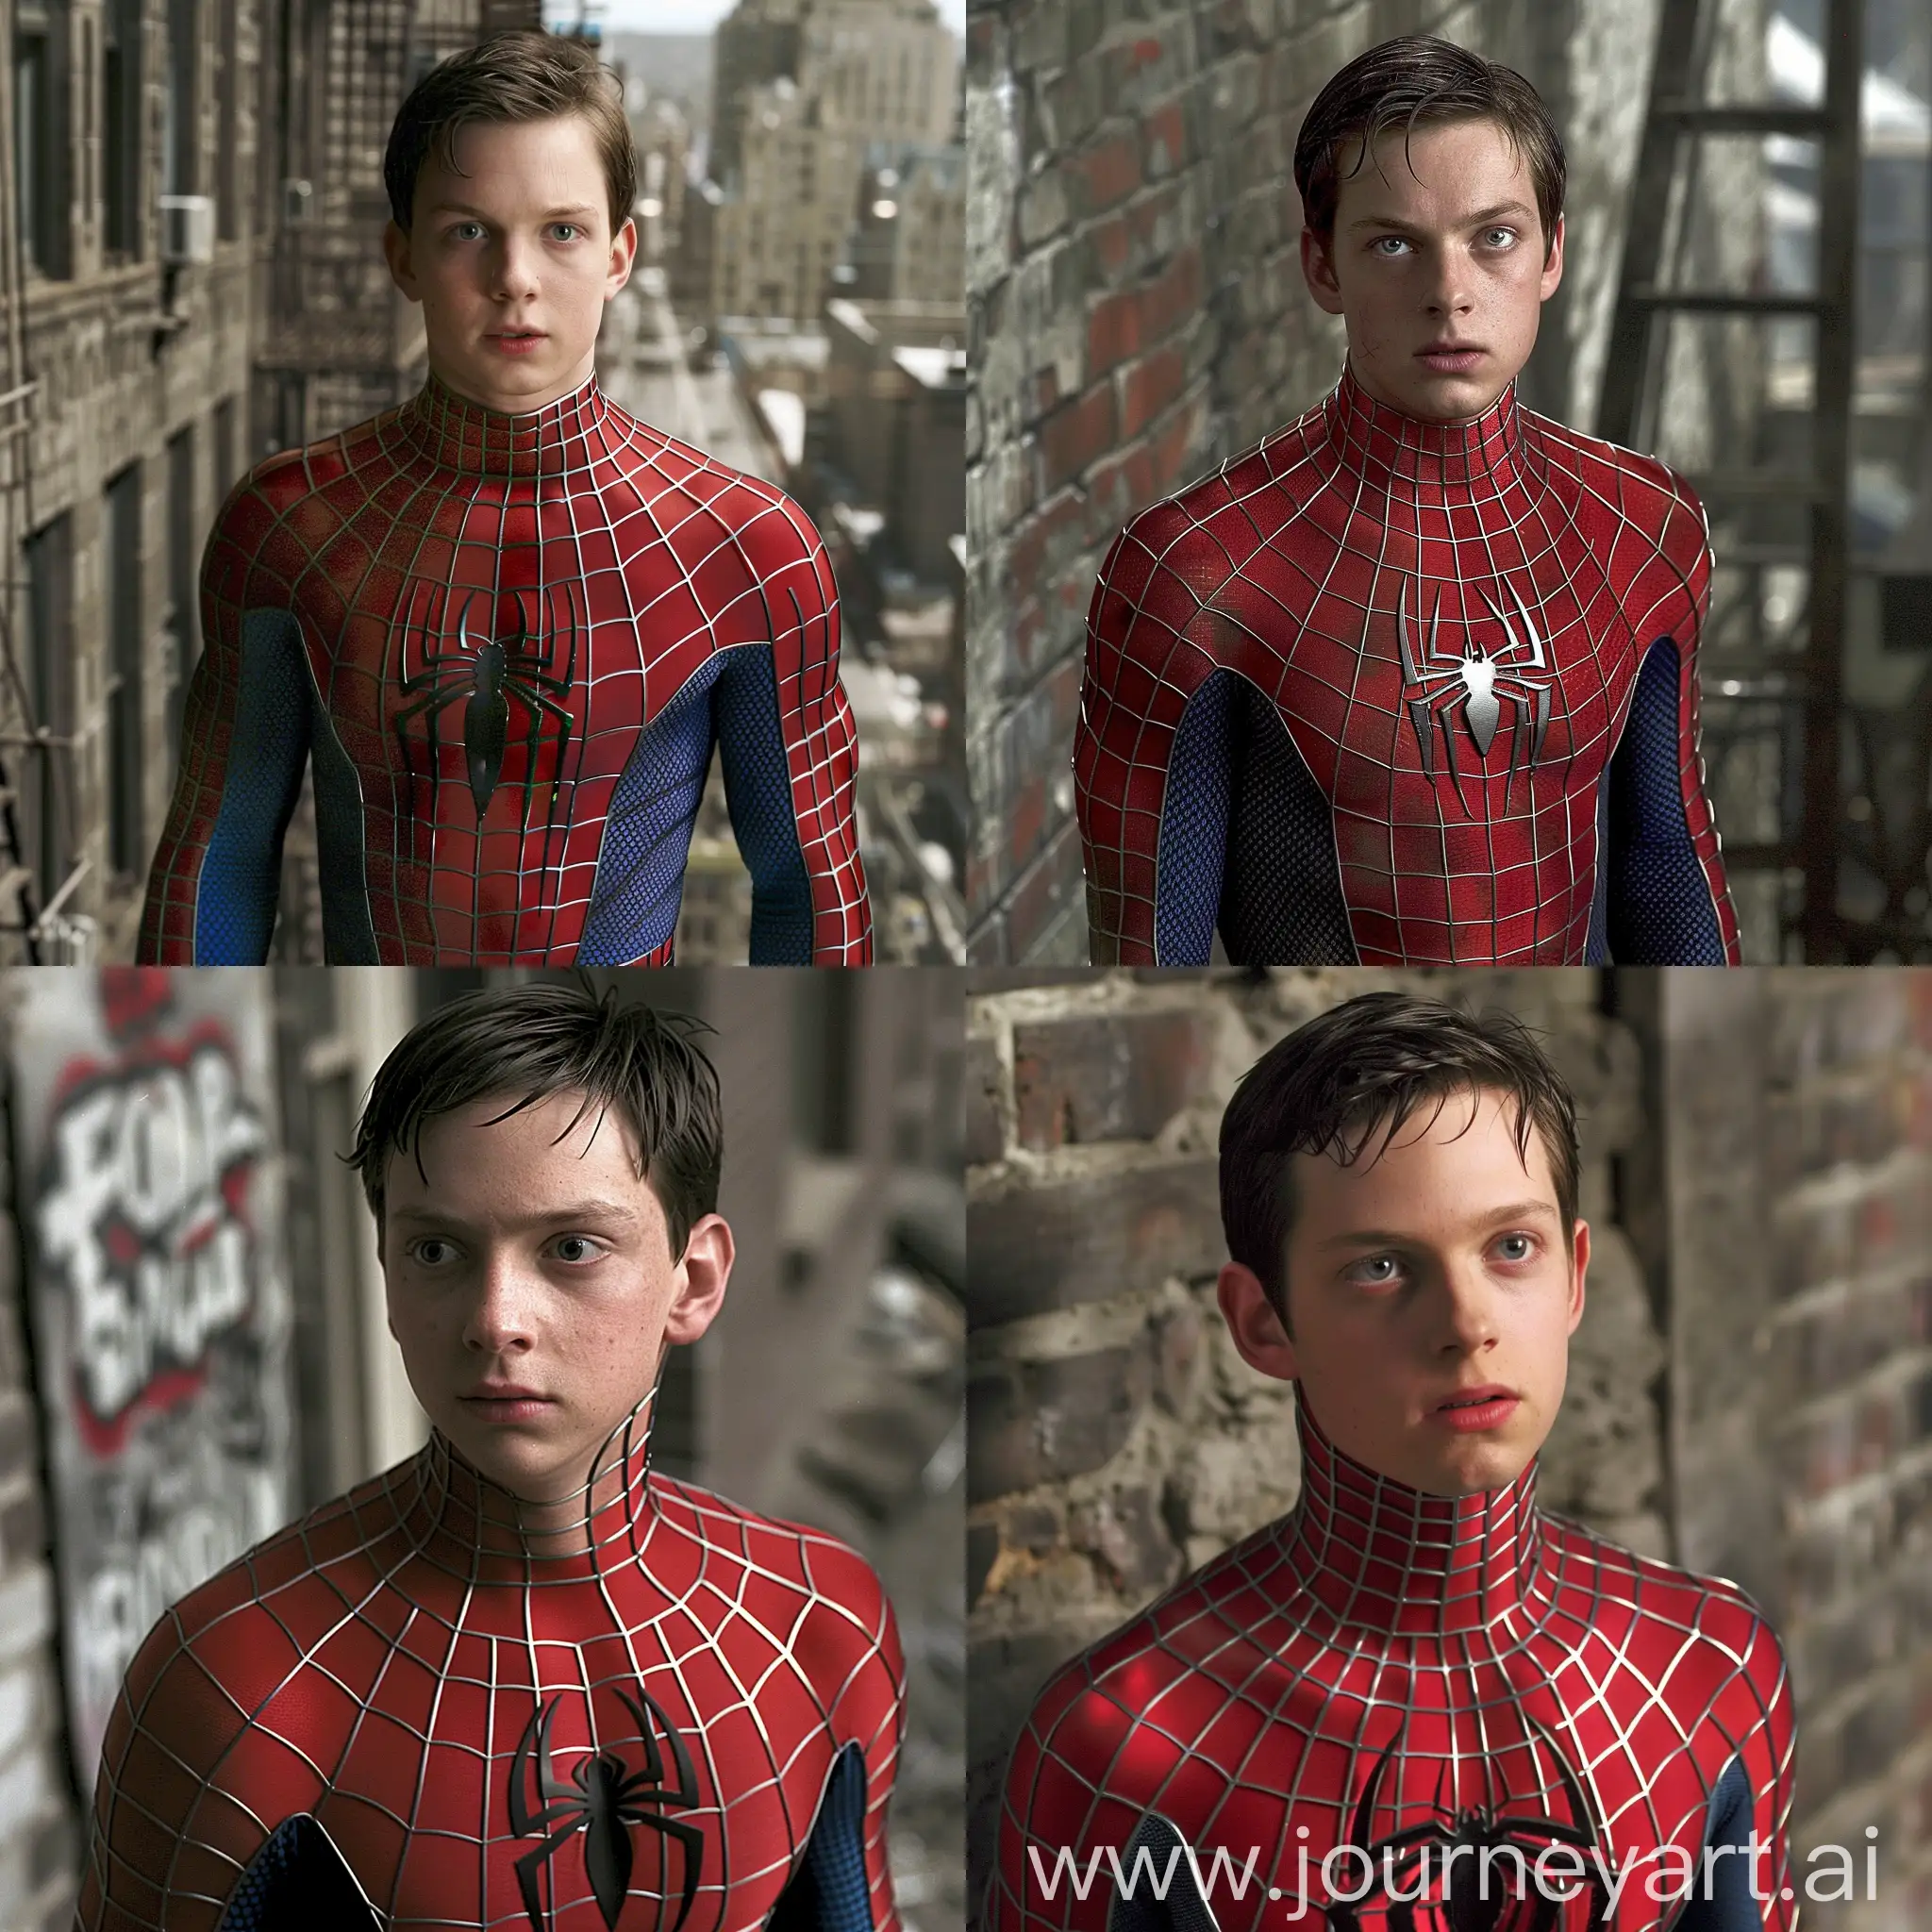 Tobey-Maguire-as-SpiderMan-in-a-Raw-Artistic-Style